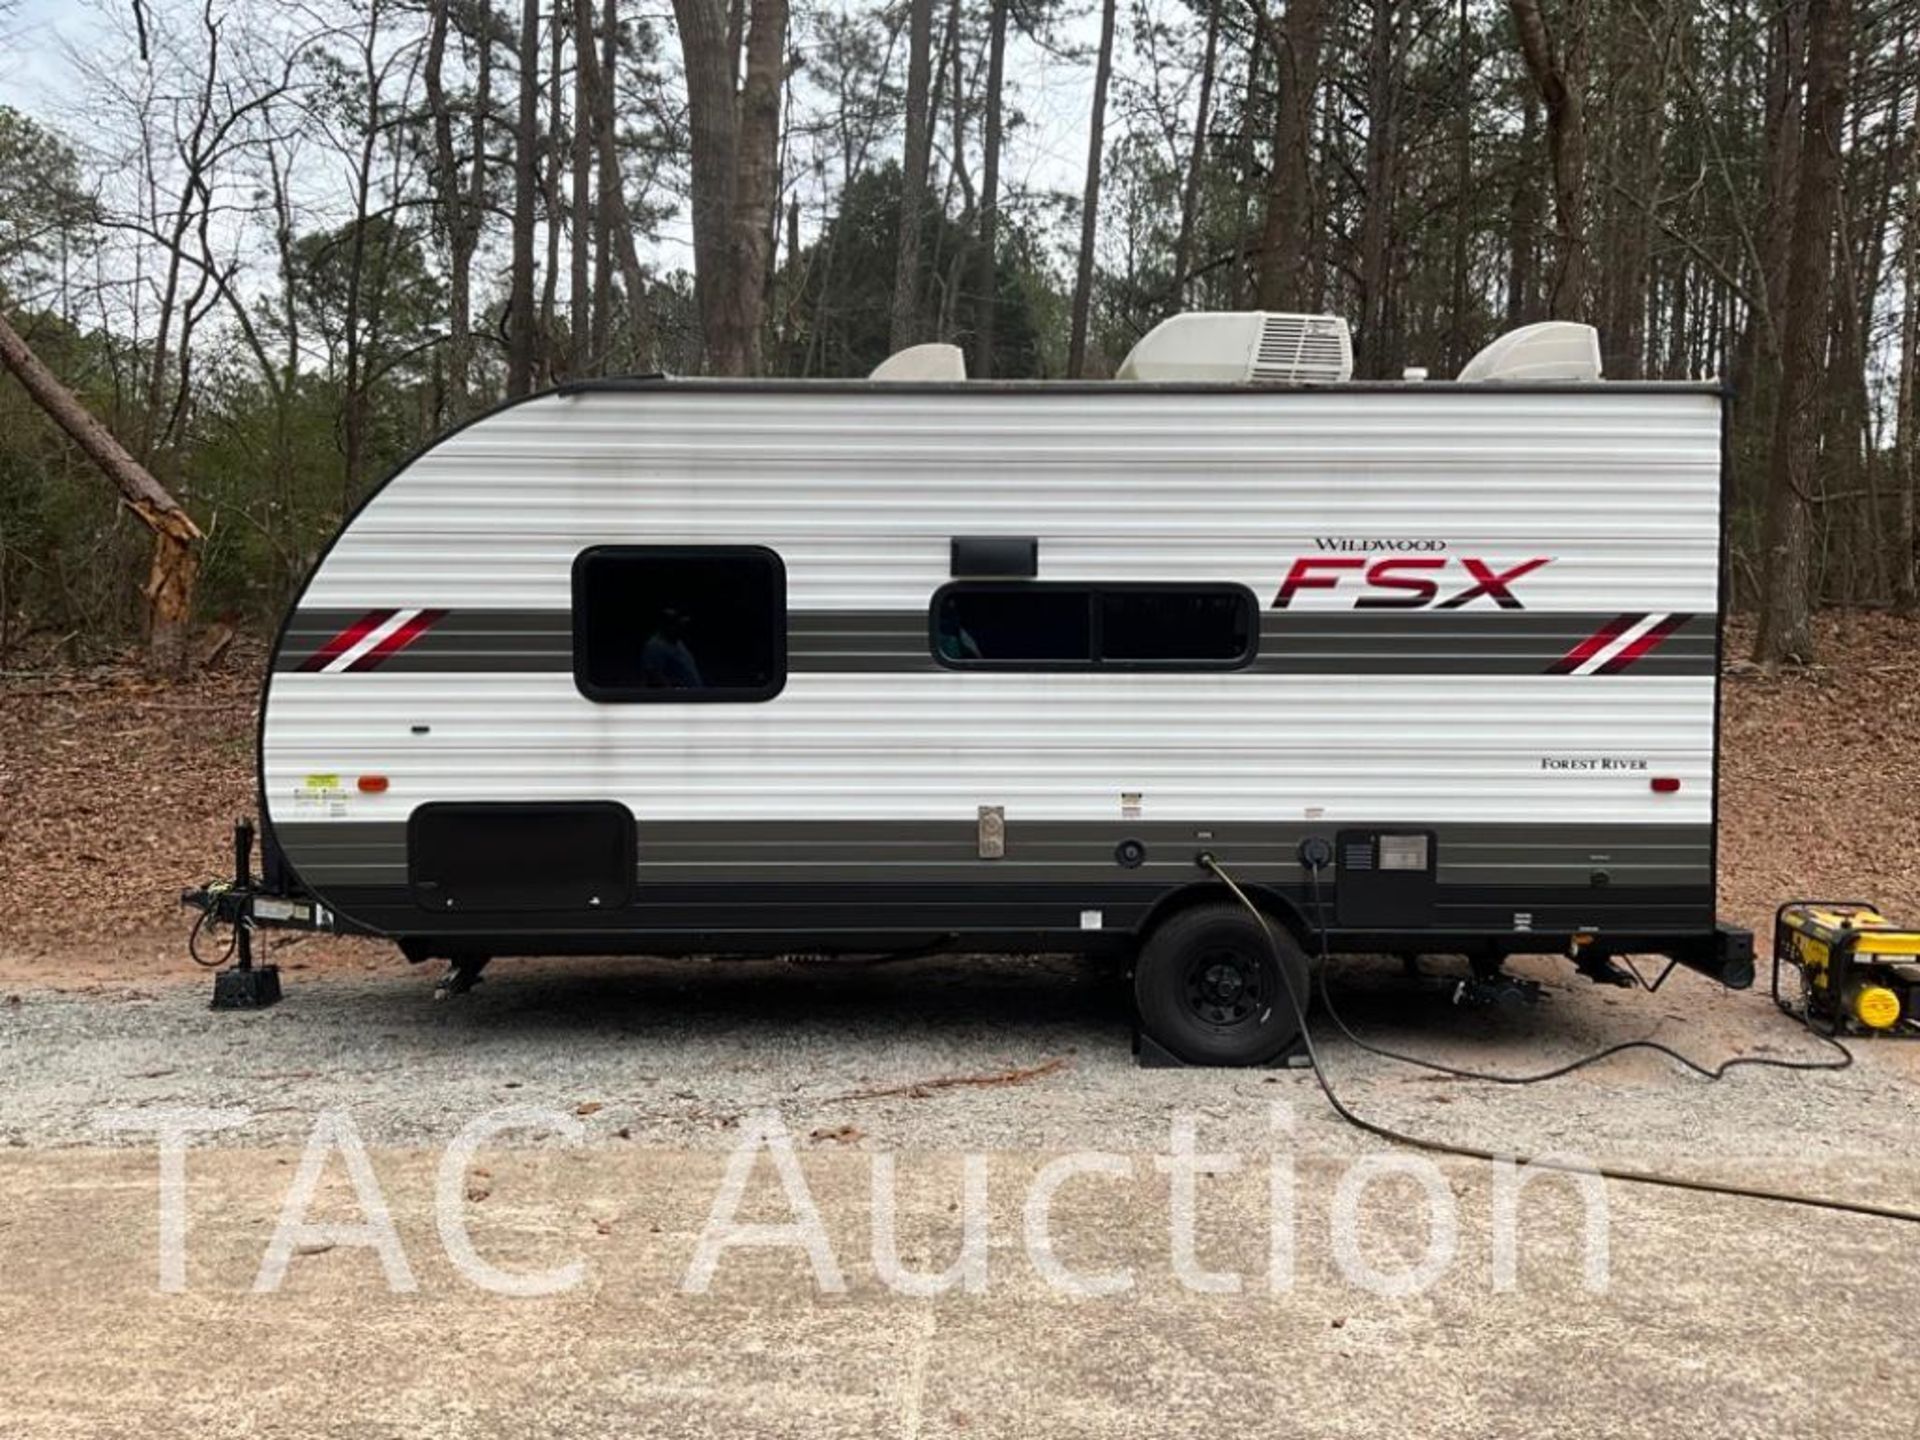 2021 Forest River Wildwood FSX 167RBK Bumper Pull Camper - Image 2 of 85